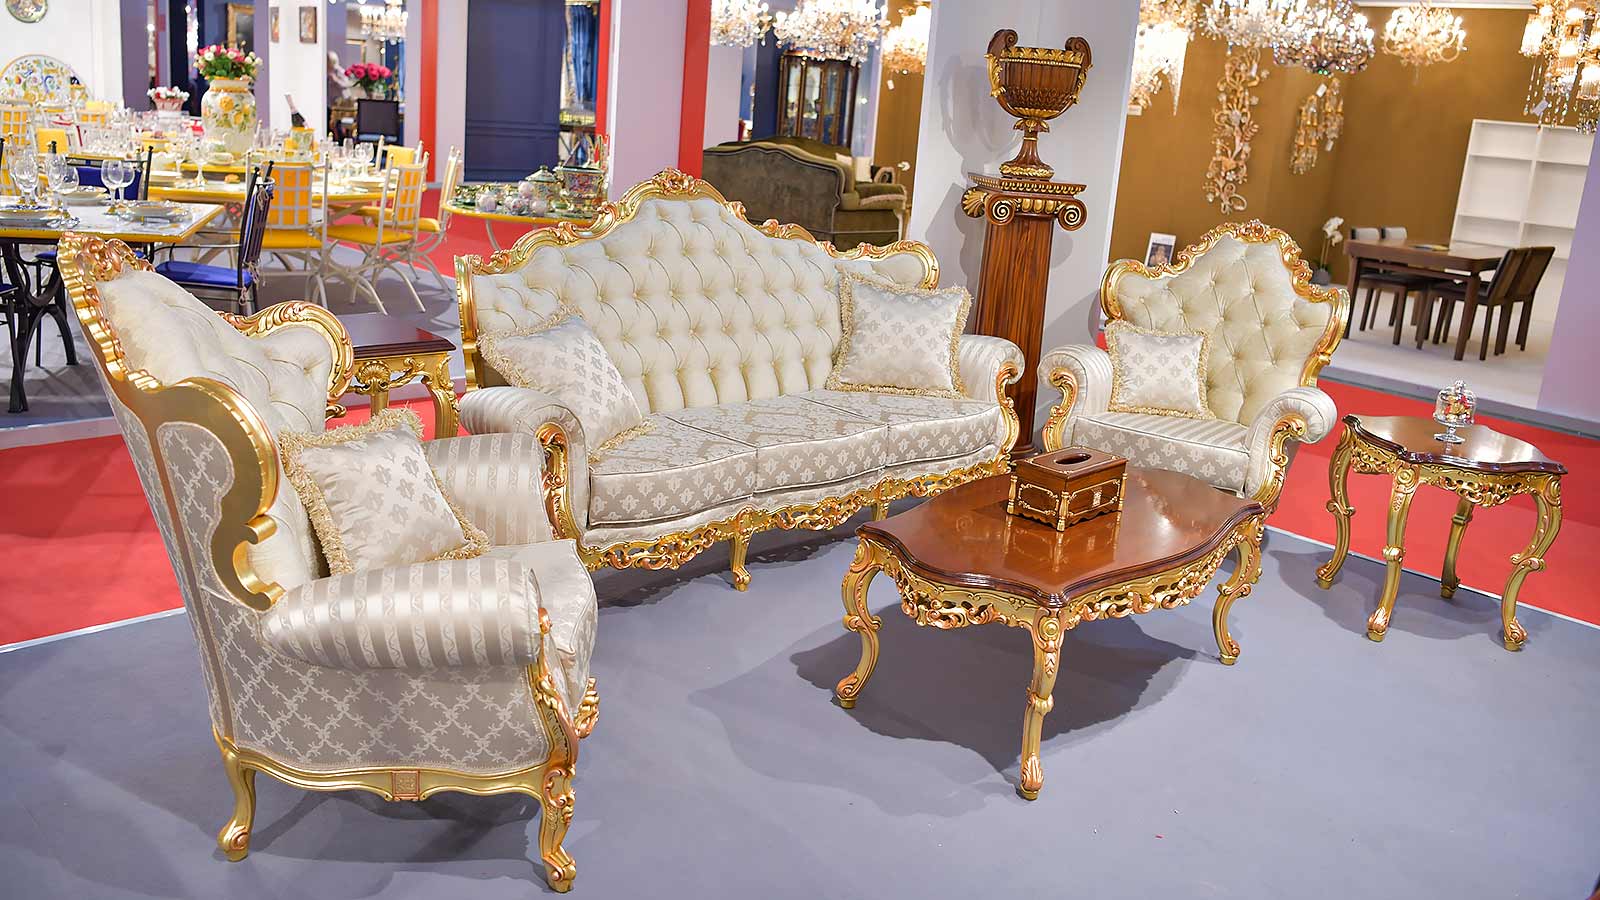 nothing Troubled Countryside Italian Living Room Furniture - Classic Luxury Living Room Furniture